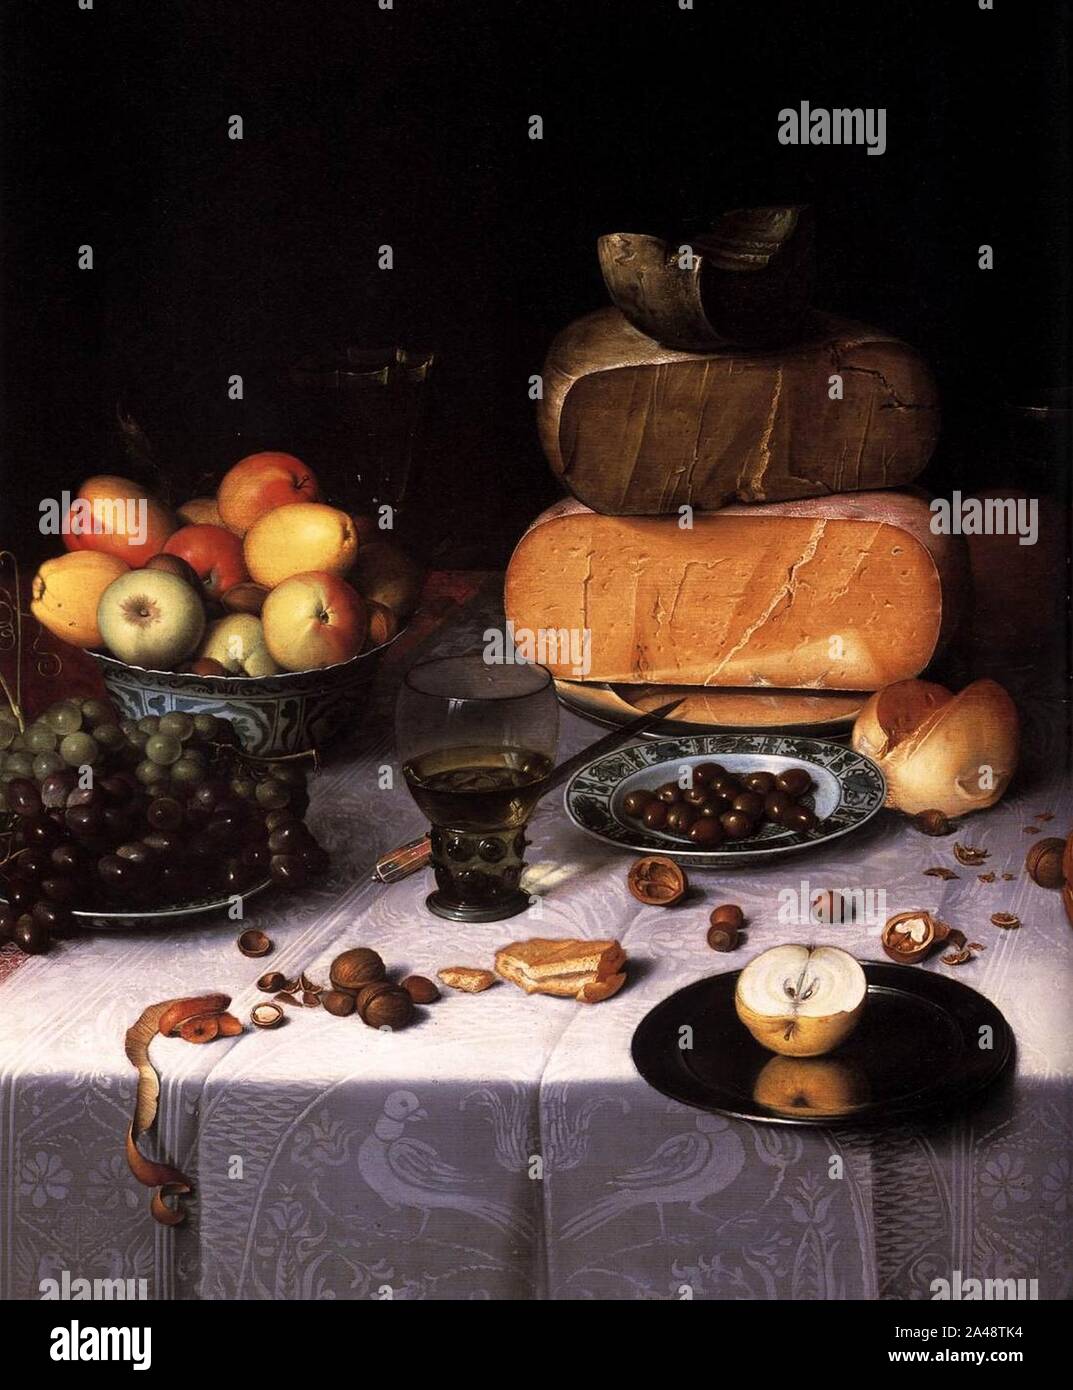 Floris van Dyck - Laid Table with Cheeses and Fruit (detail) Stock Photo